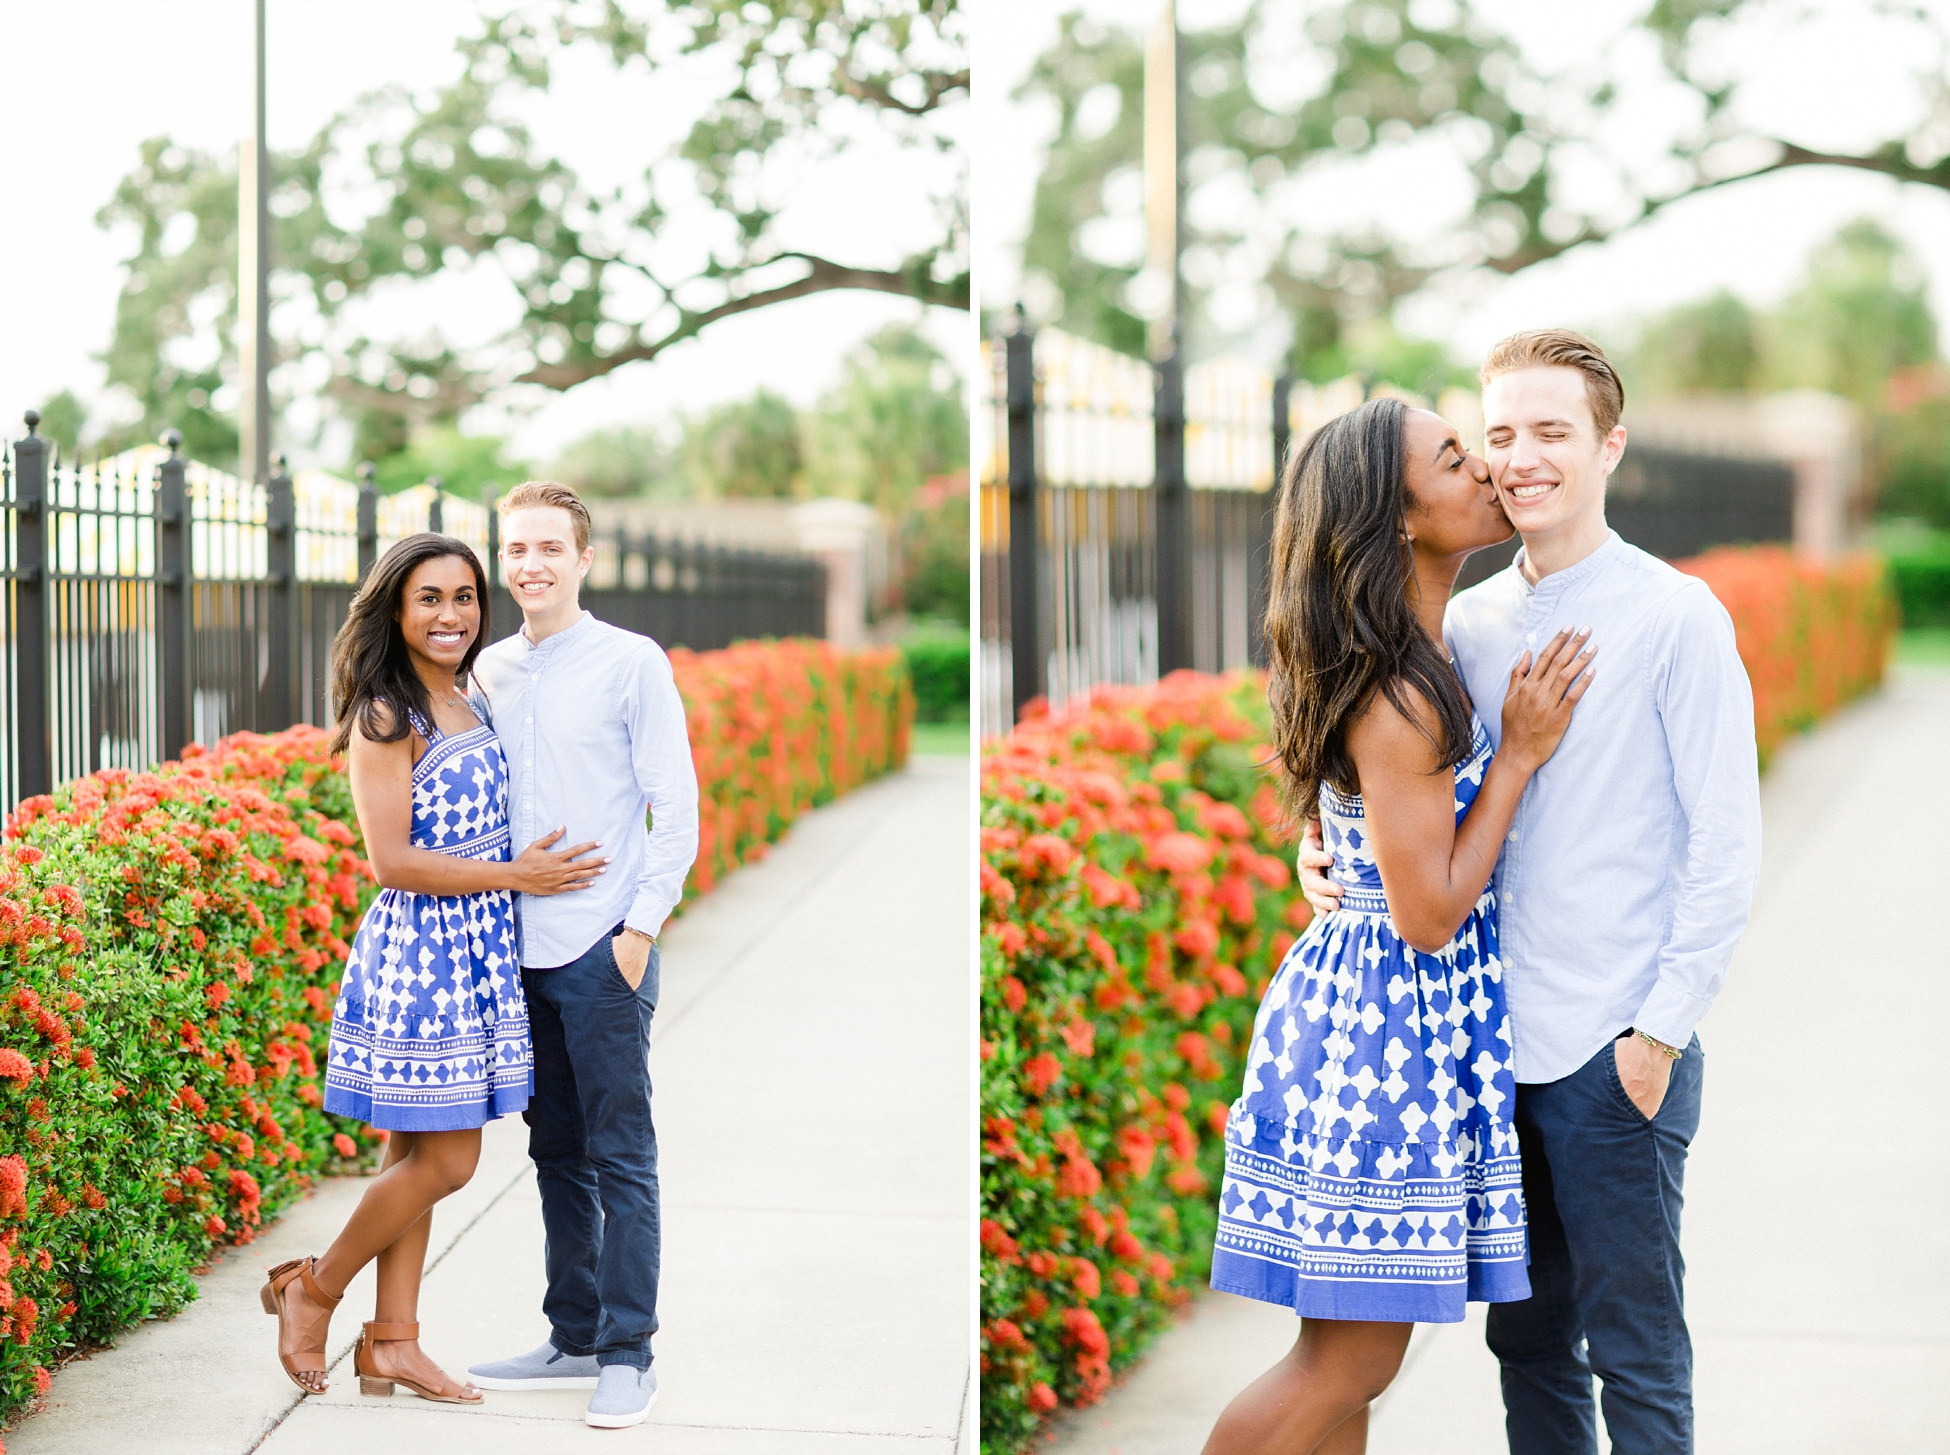 Tampa Engagement | © Ailyn La Torre Photography 2018